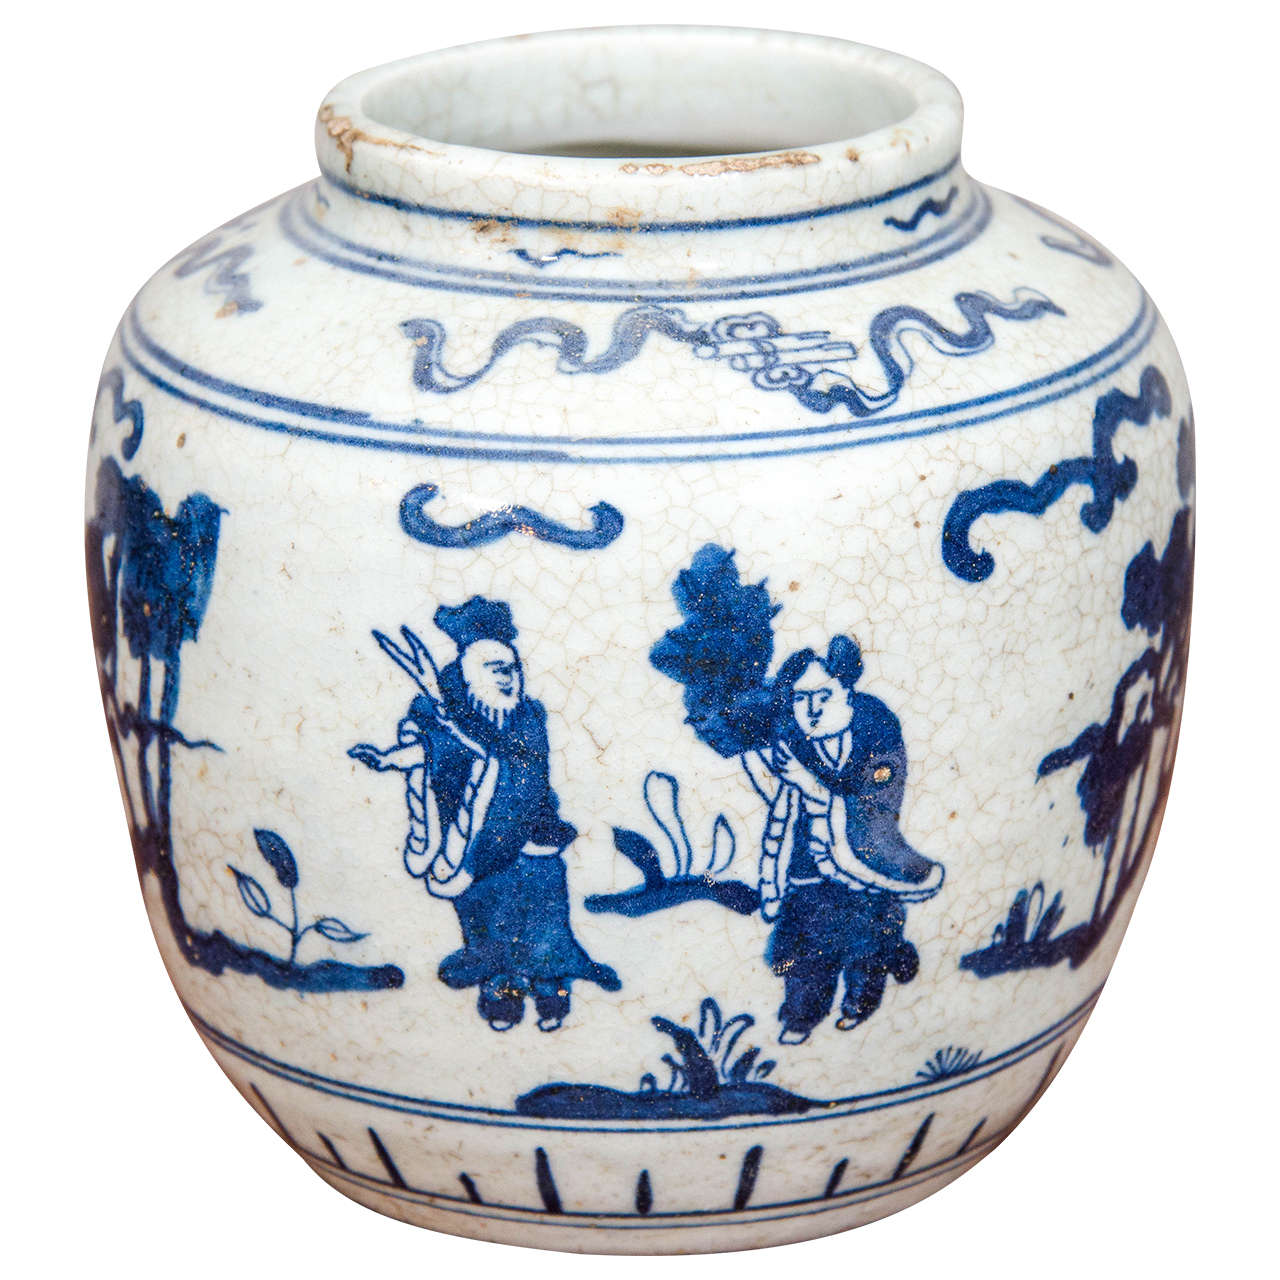 Single Chinese Blue and White Porcelain Jar Decorated with Figures